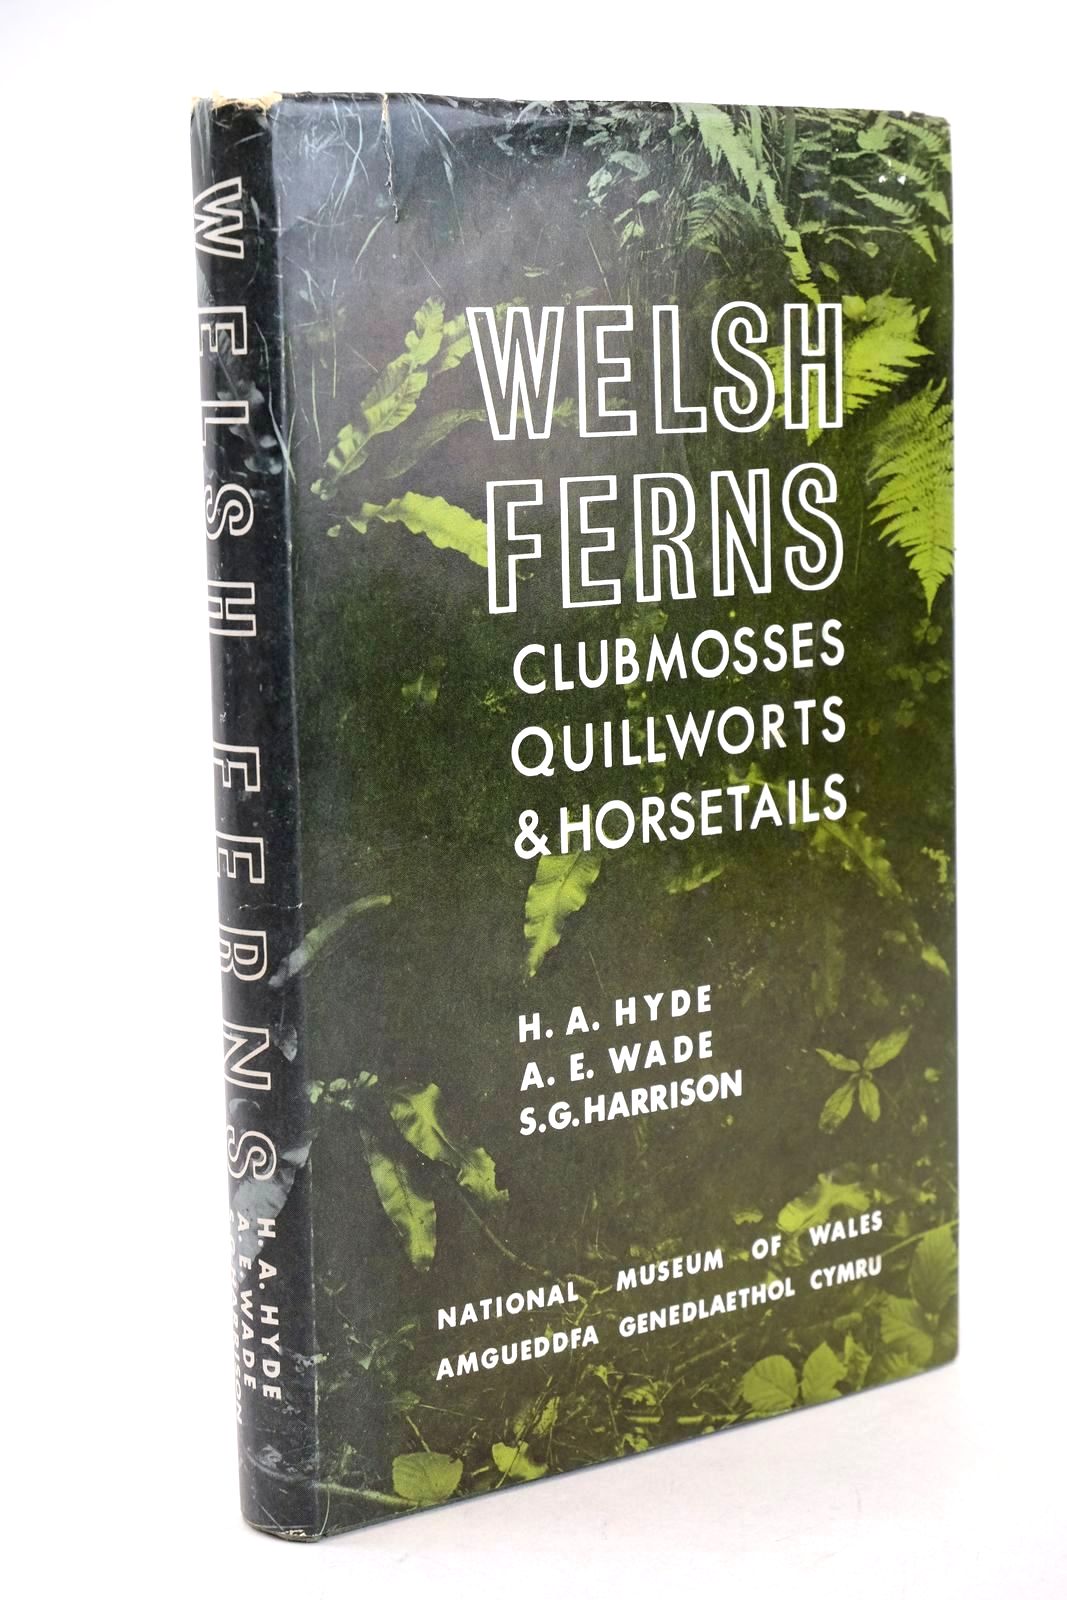 Photo of WELSH FERNS CLUBMOSSES QUILLWORTS & HORSETAILS- Stock Number: 1326537